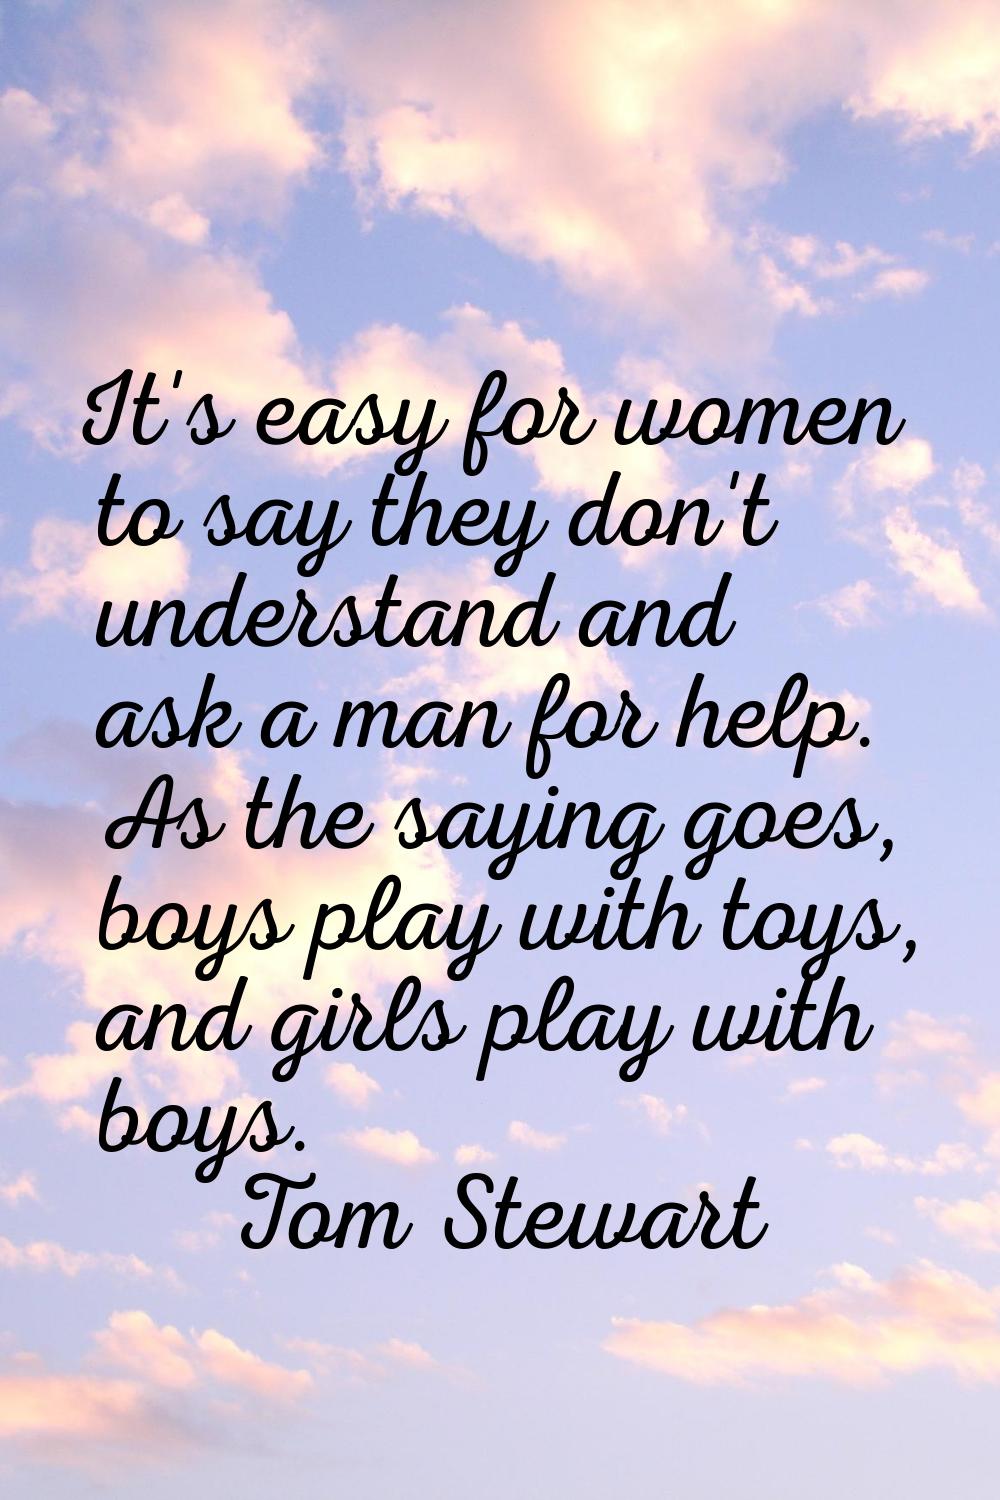 It's easy for women to say they don't understand and ask a man for help. As the saying goes, boys p